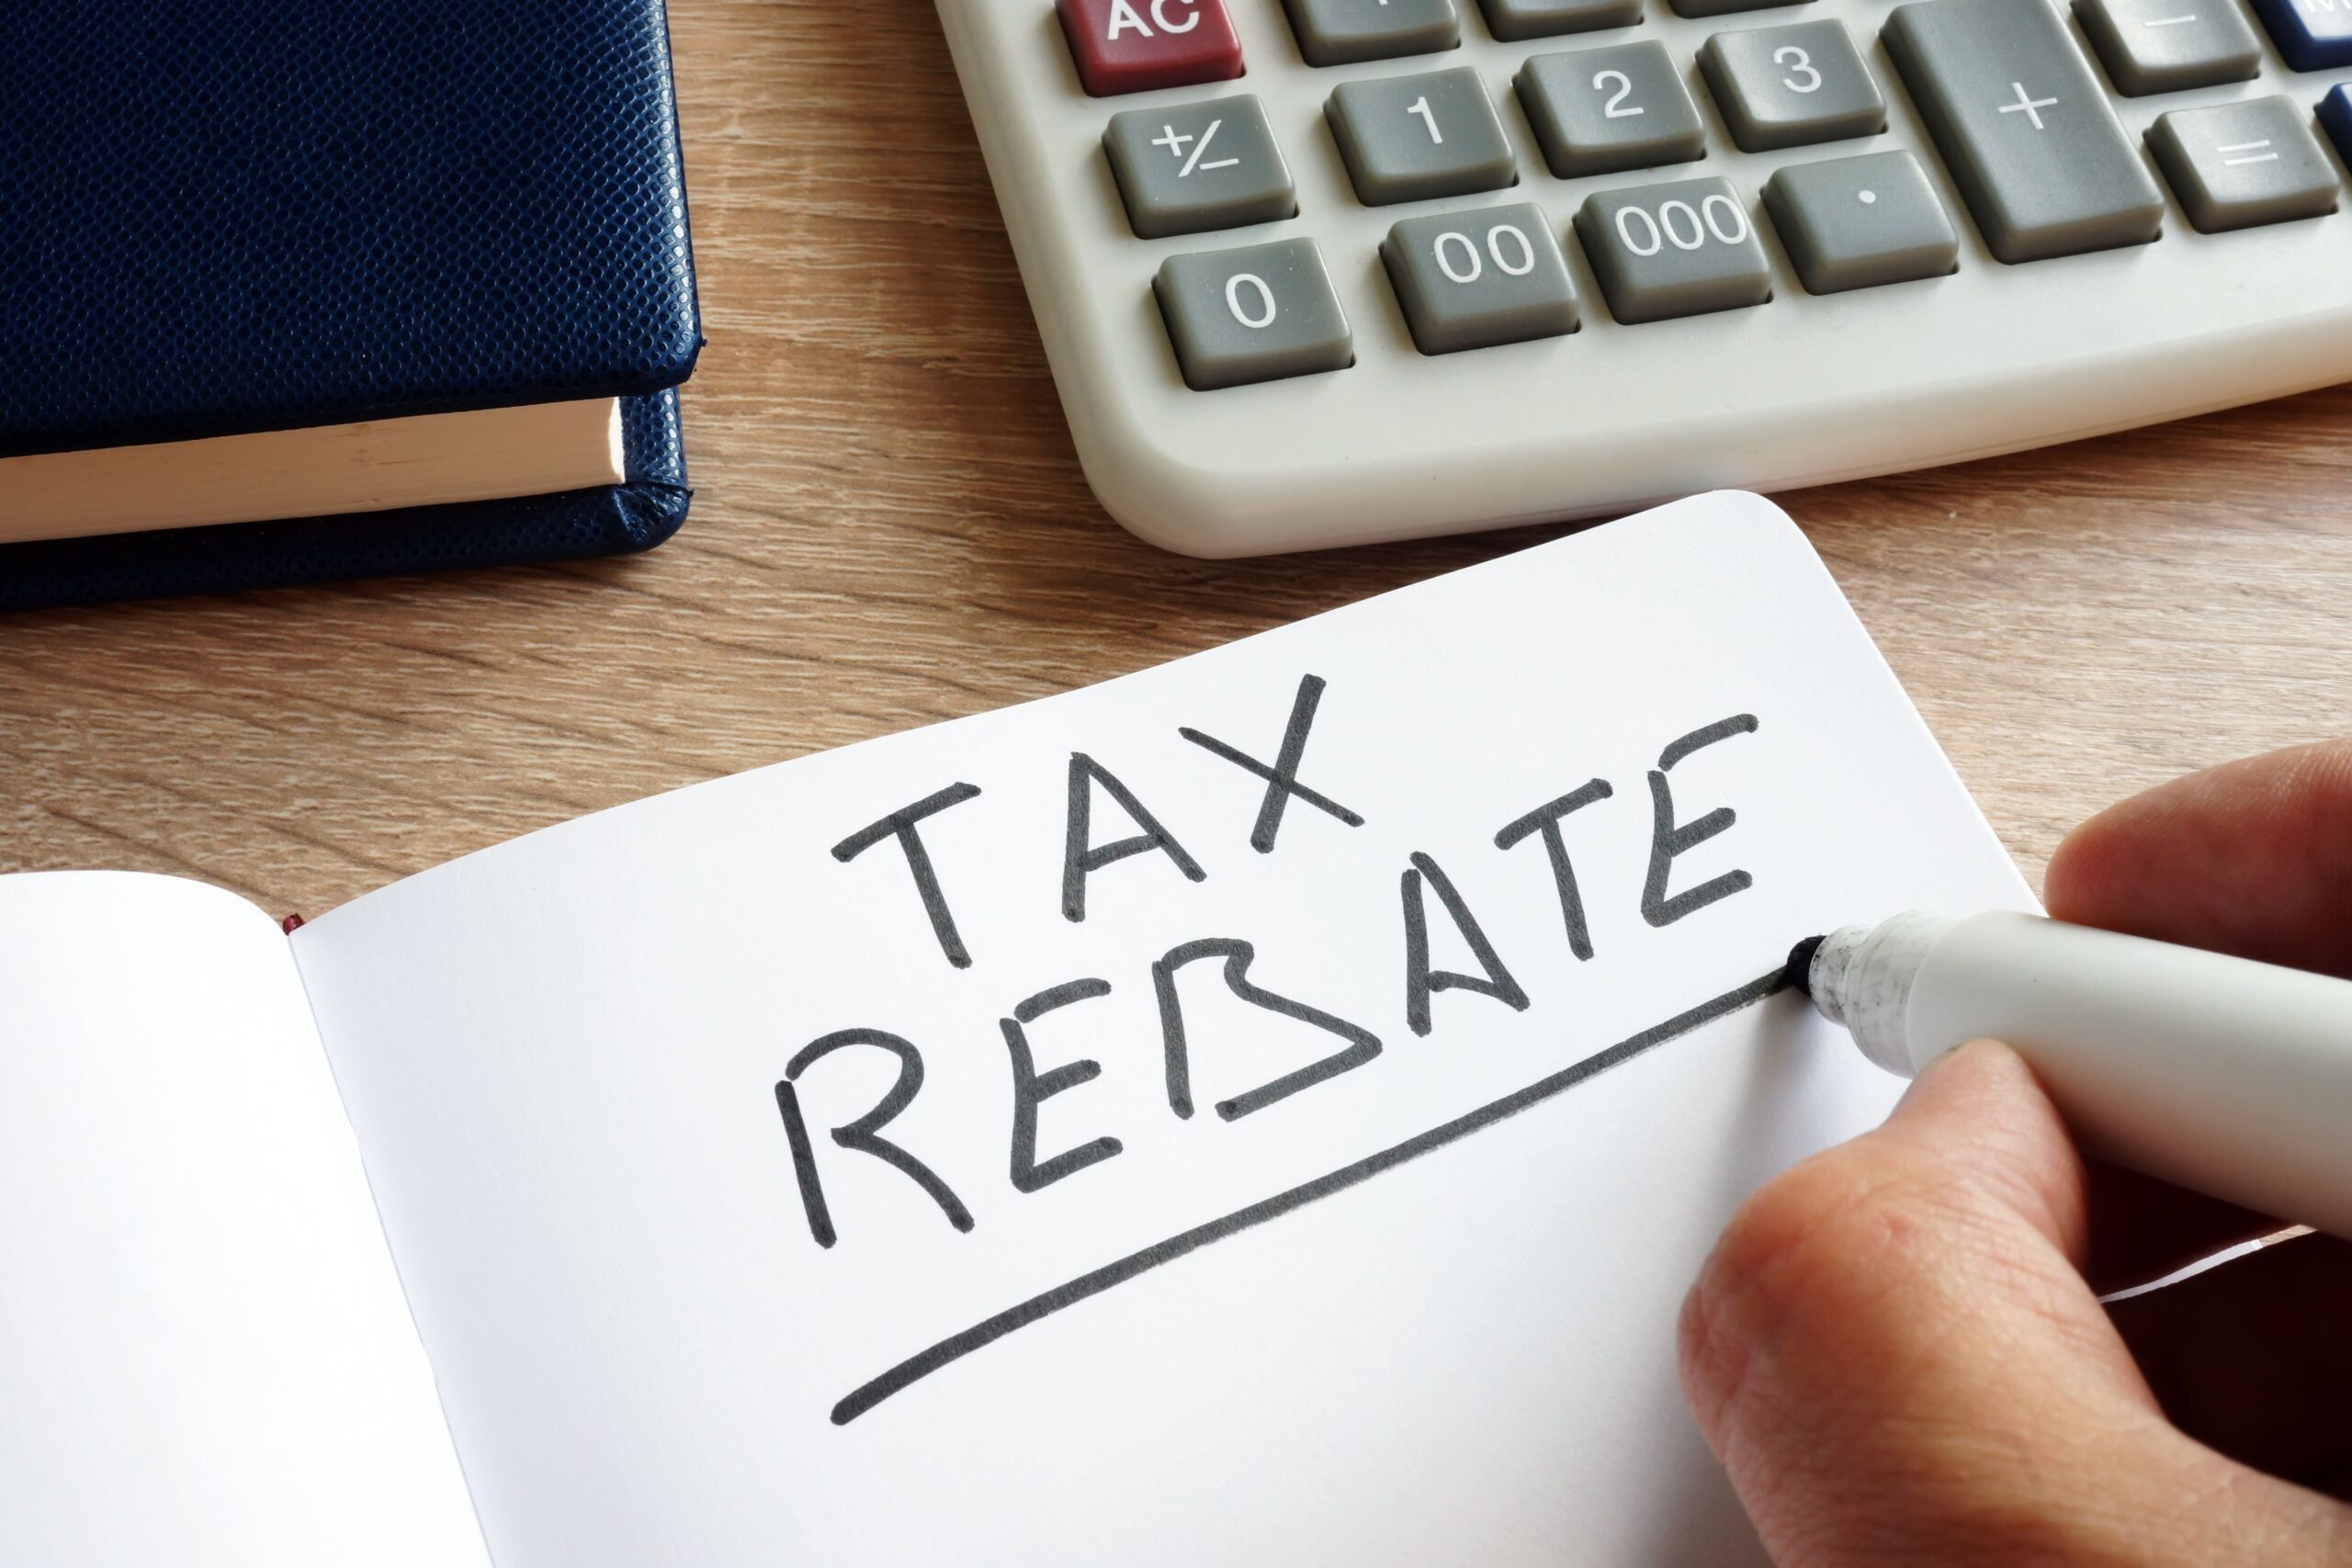 tax-rebate-or-tax-refund-are-you-entitled-quickrebates